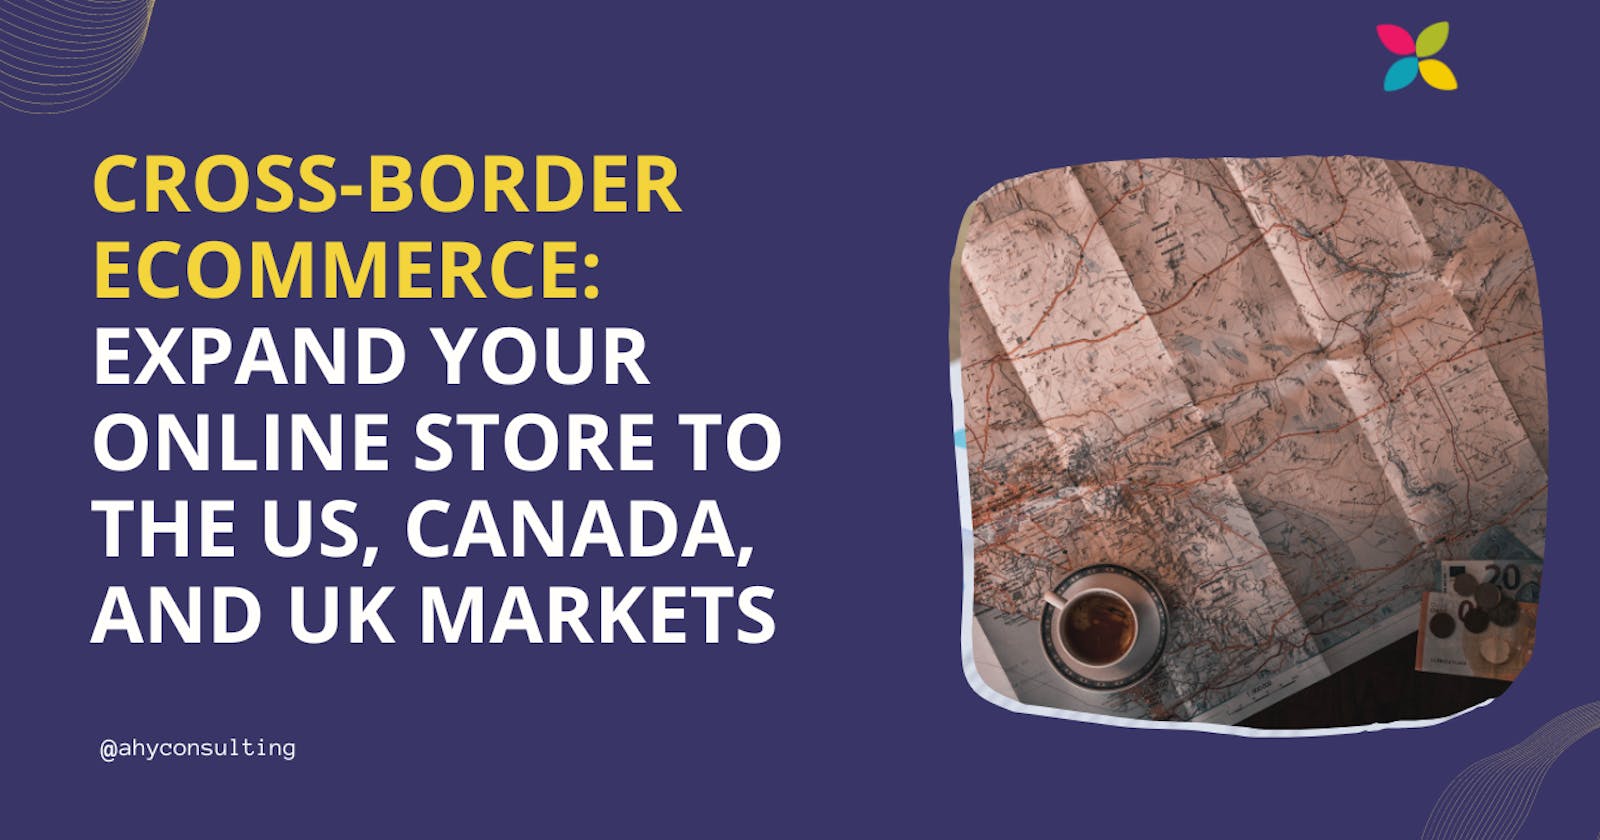 Cross-Border eCommerce: Tips and Tricks for Successfully Expanding Your Online Store to the US, Canada, and UK Markets